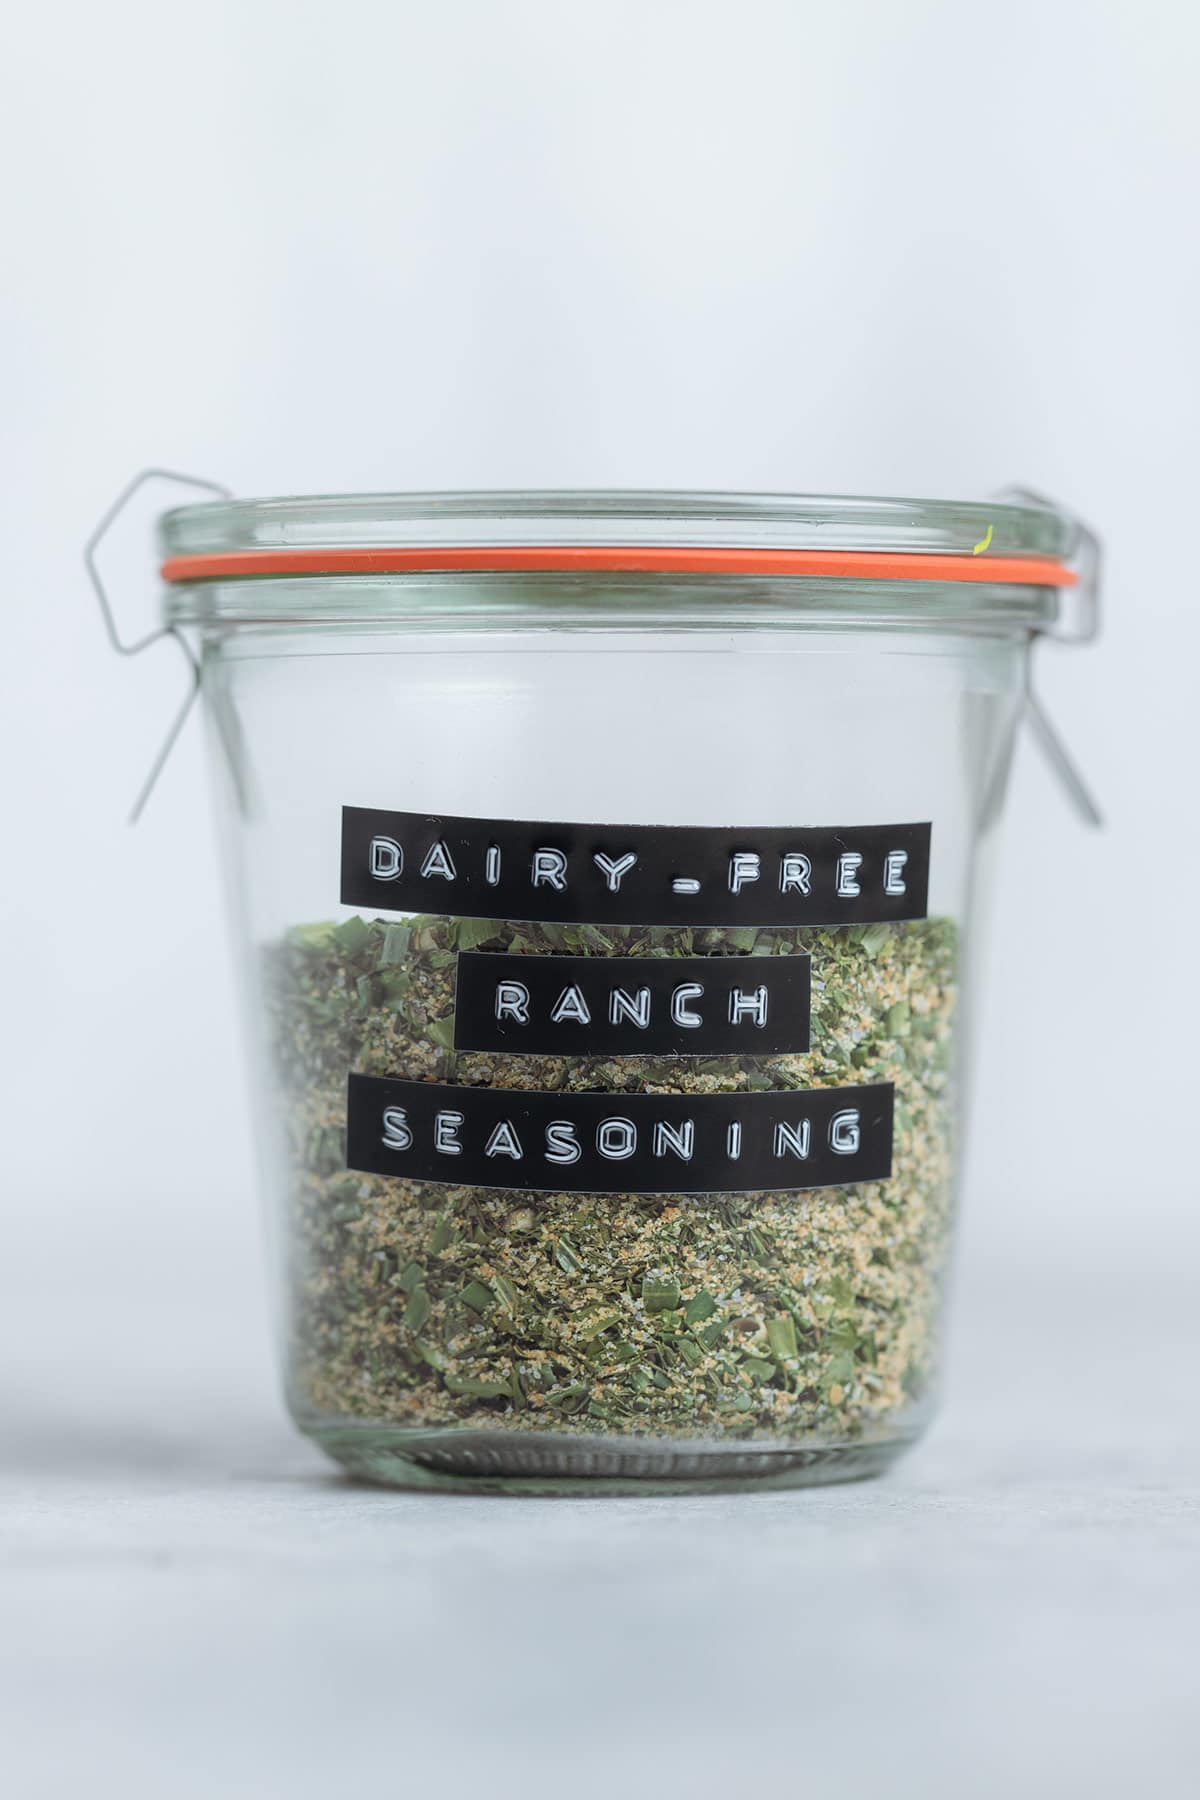 Ranch seasoning in a glass jar labeled with a black label on a white background.